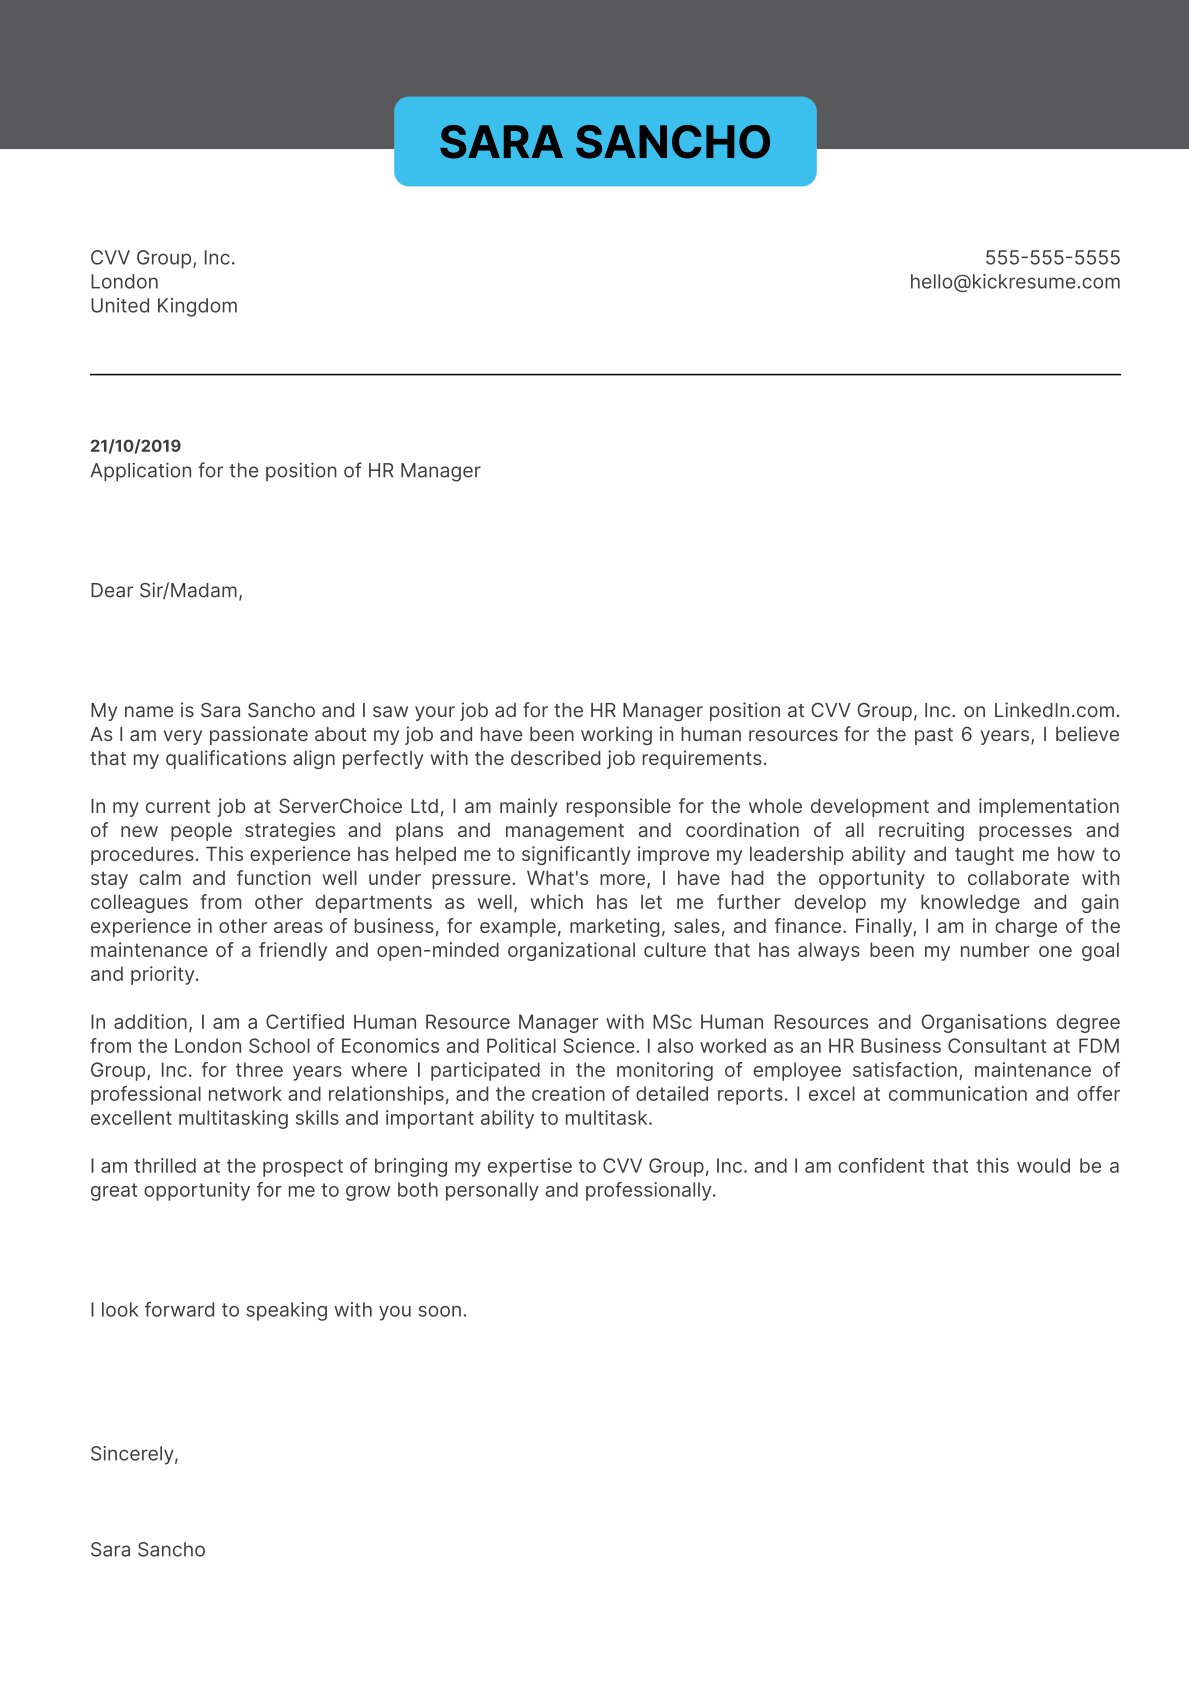 HR manager cover letter example